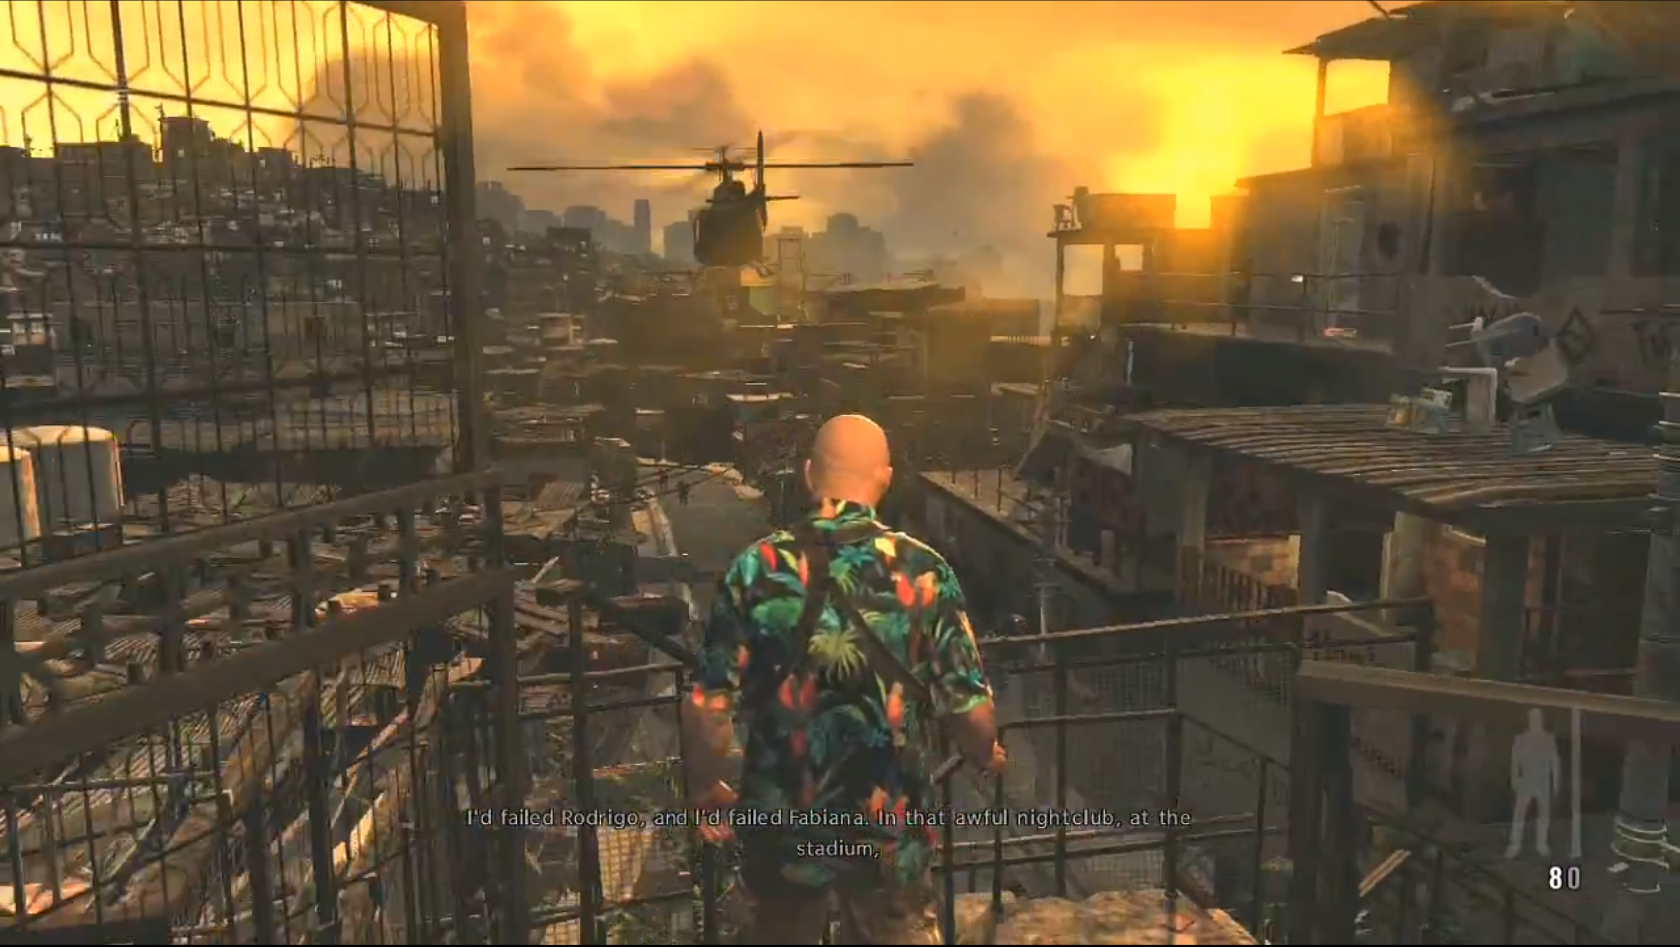 Max Payne 3 Was Ahead of Its Time and Here is Why - KeenGamer